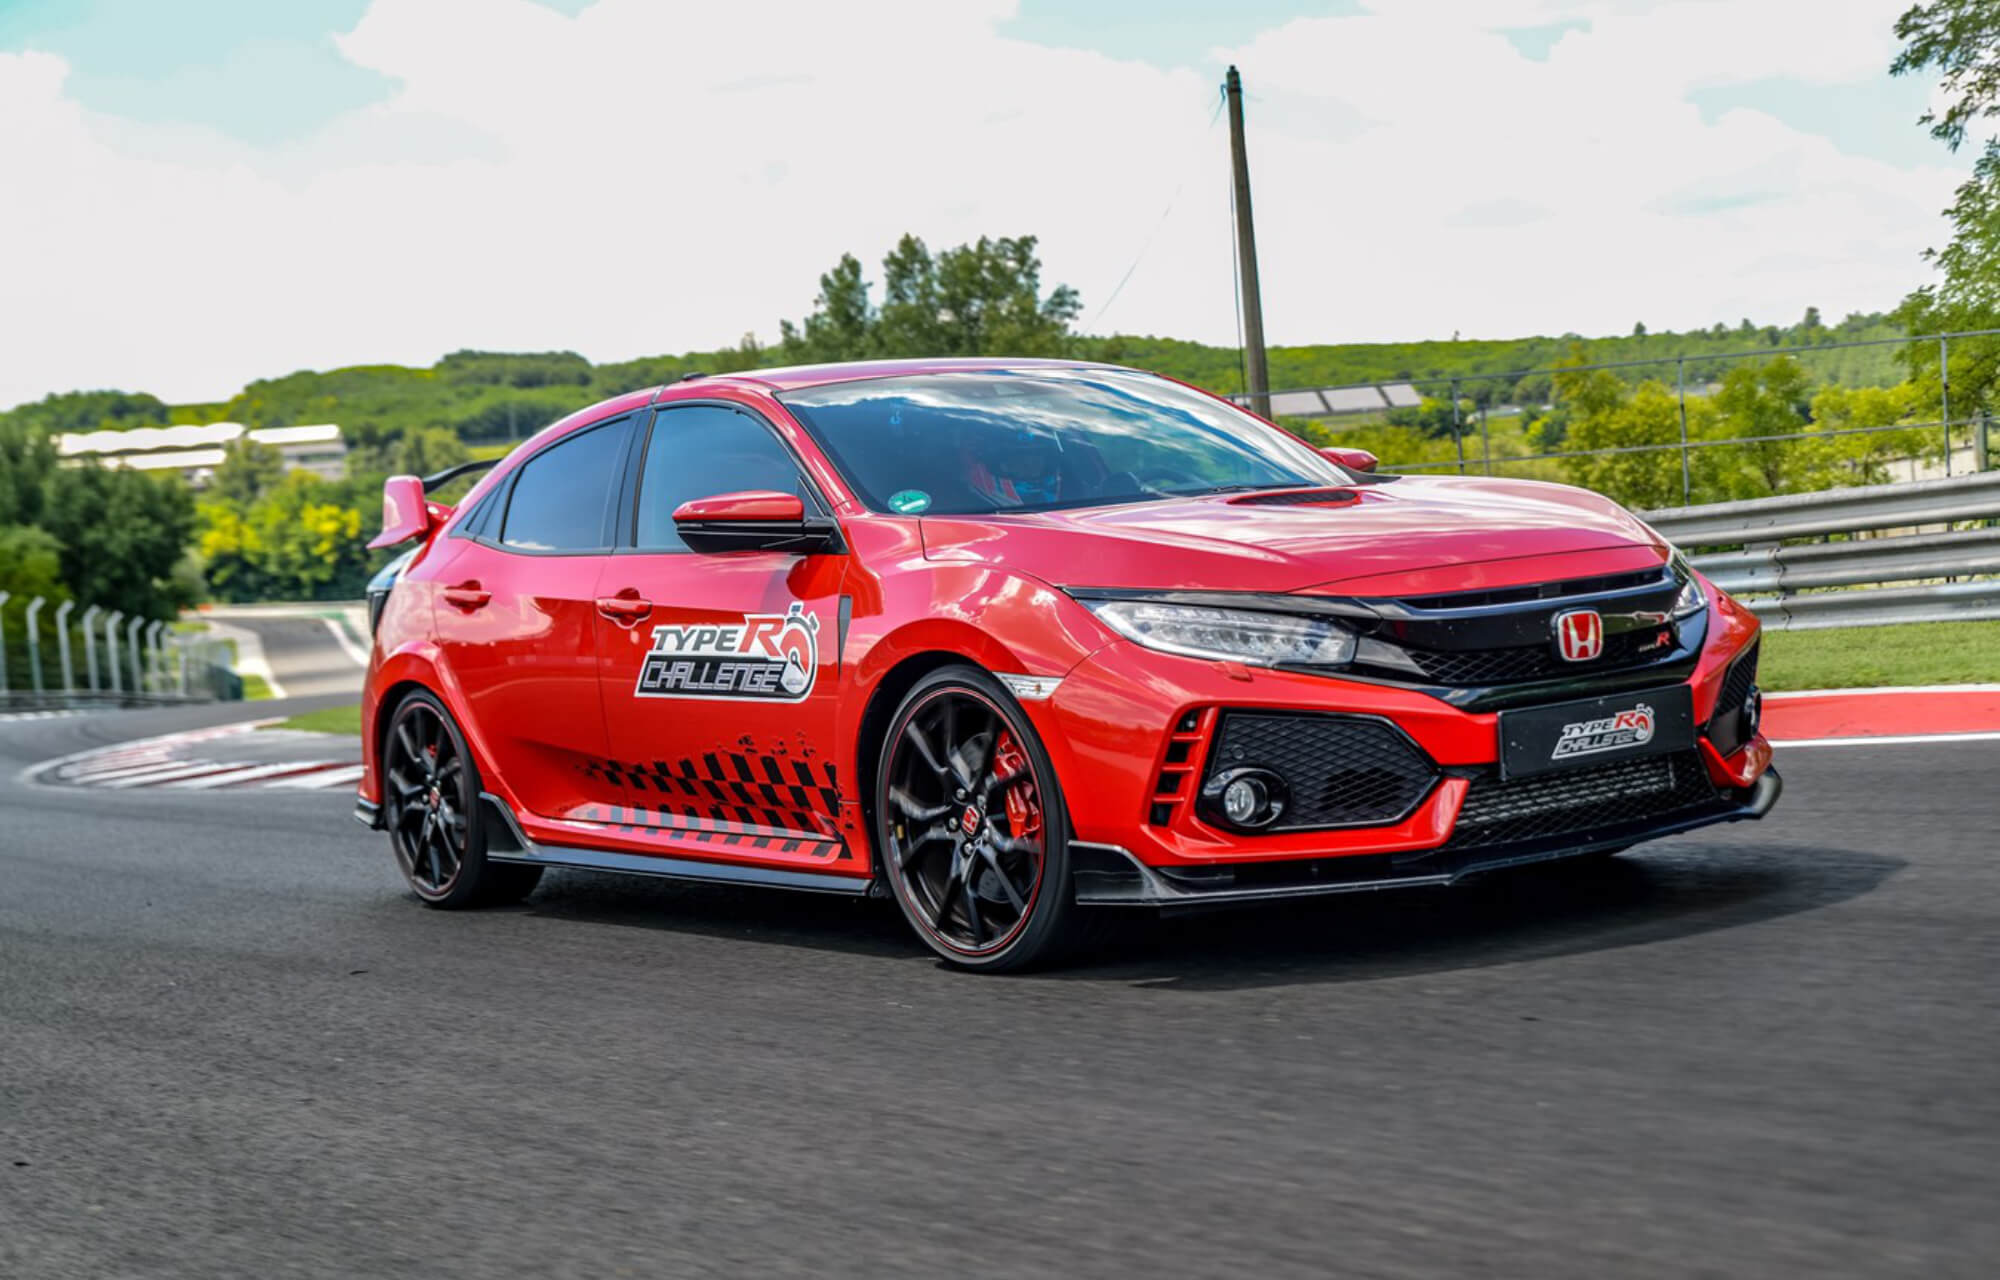 Jenson Button secures Hondas fifth and final planned lap record in Civic Type R Challenge 2018